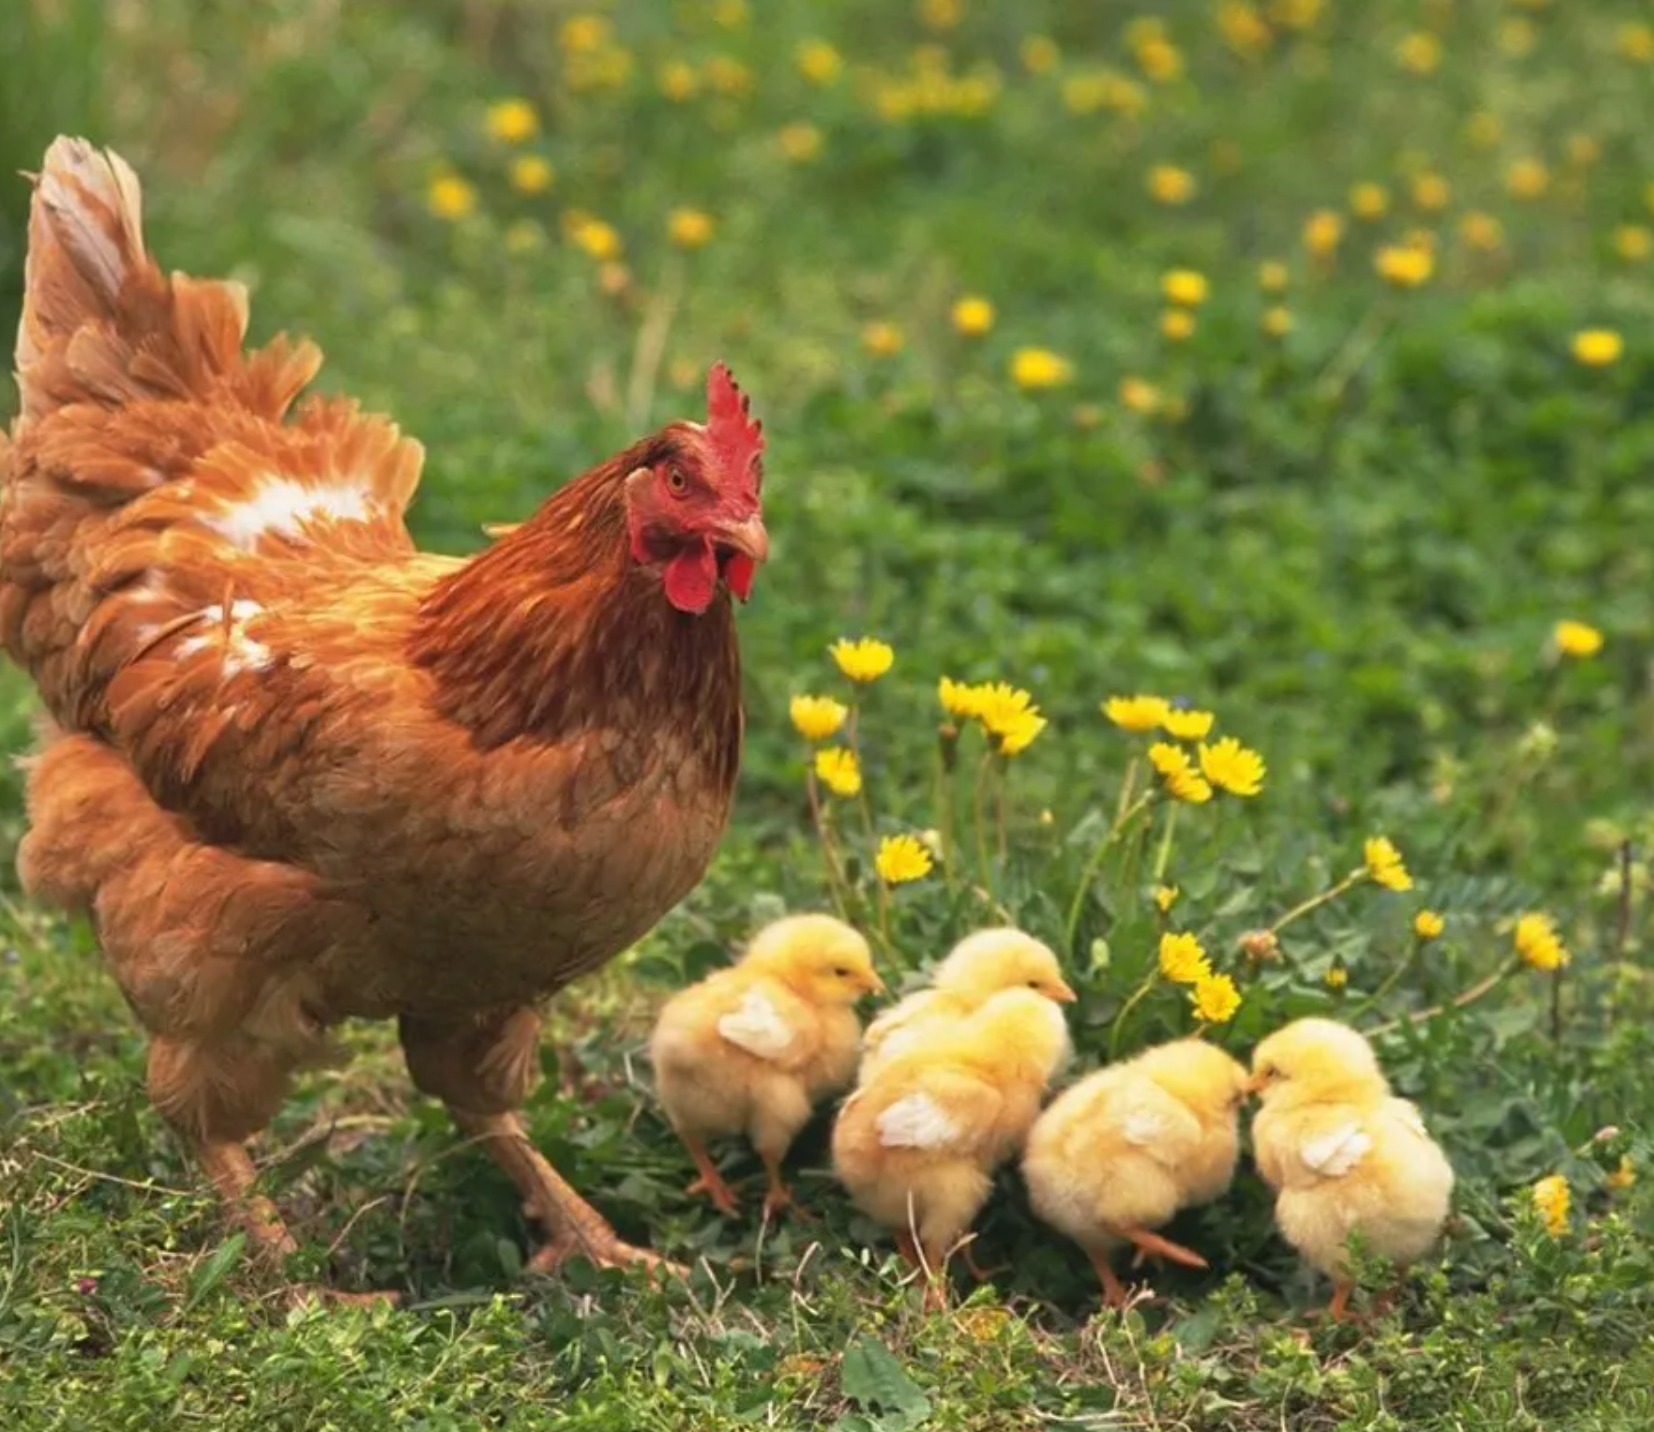 Hatching Time. Chicken shown with 5 baby chicks in a field with flowers.